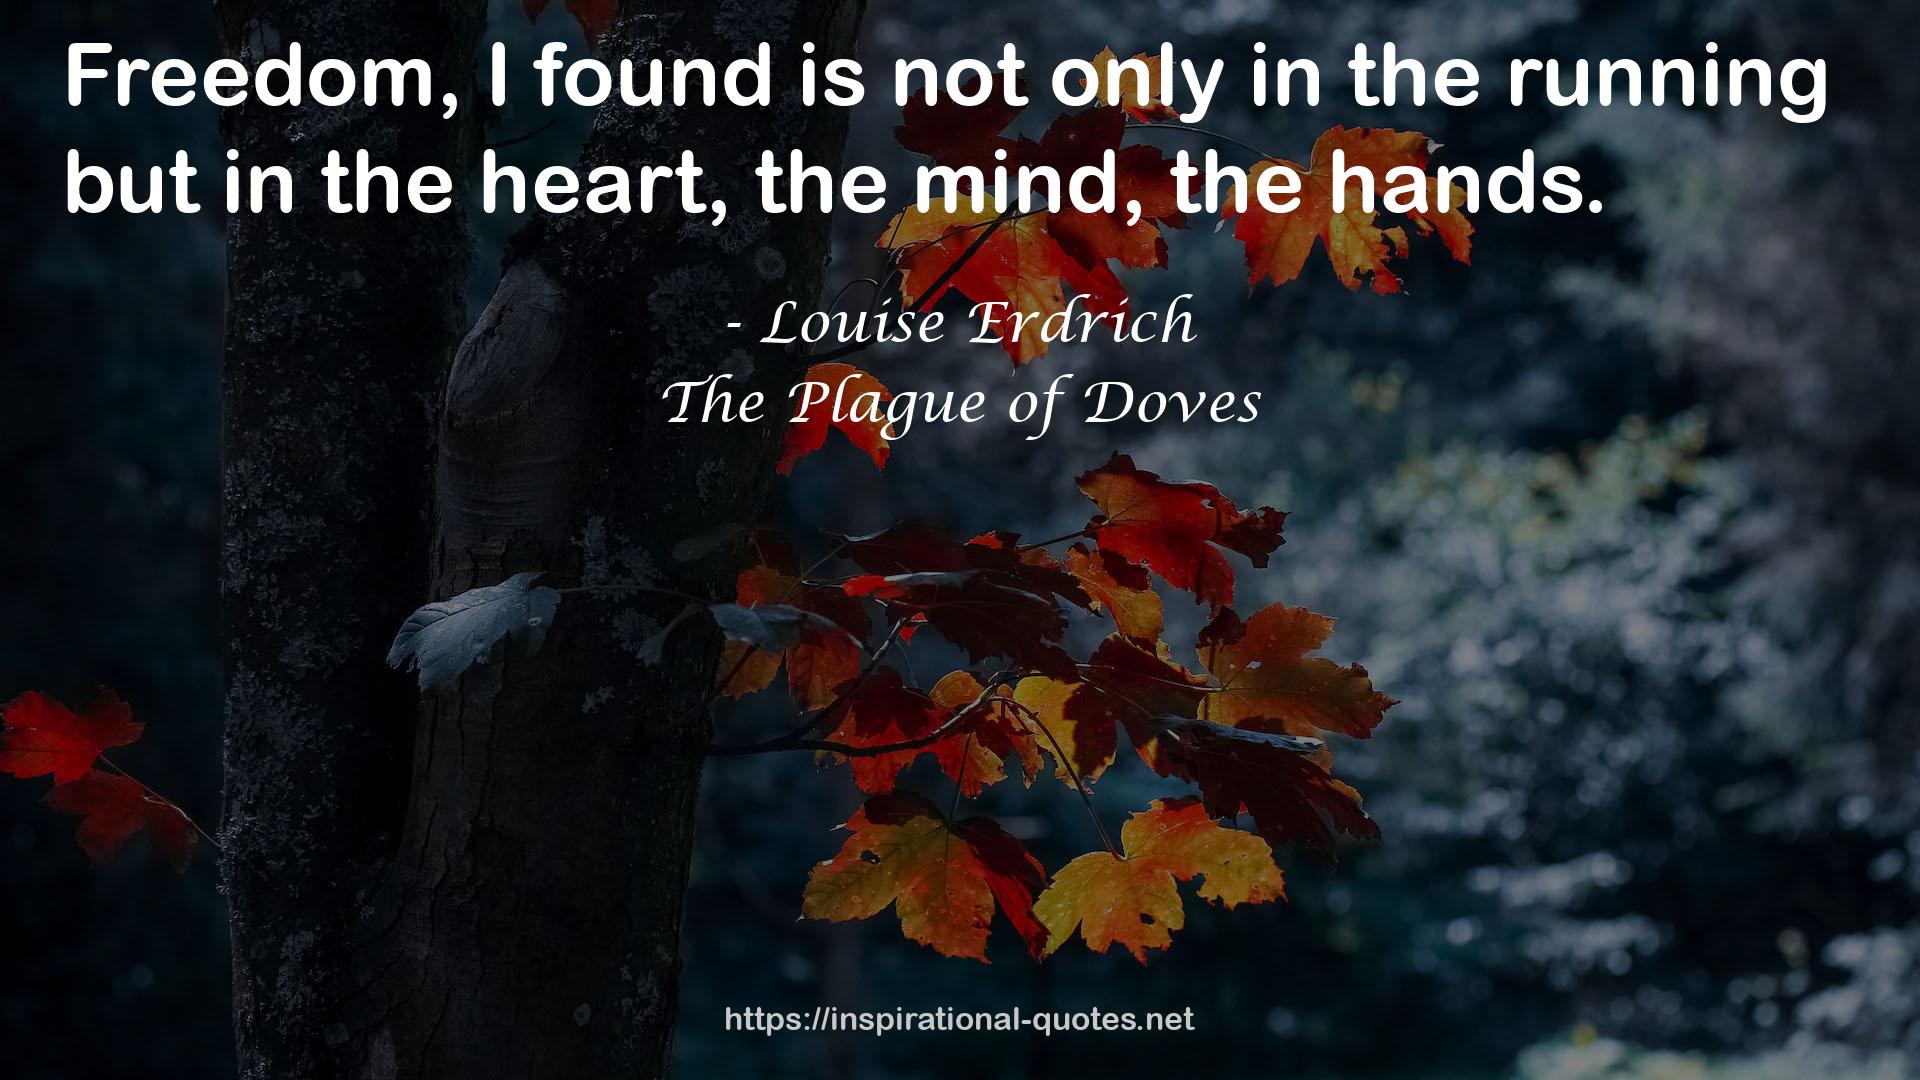 The Plague of Doves QUOTES